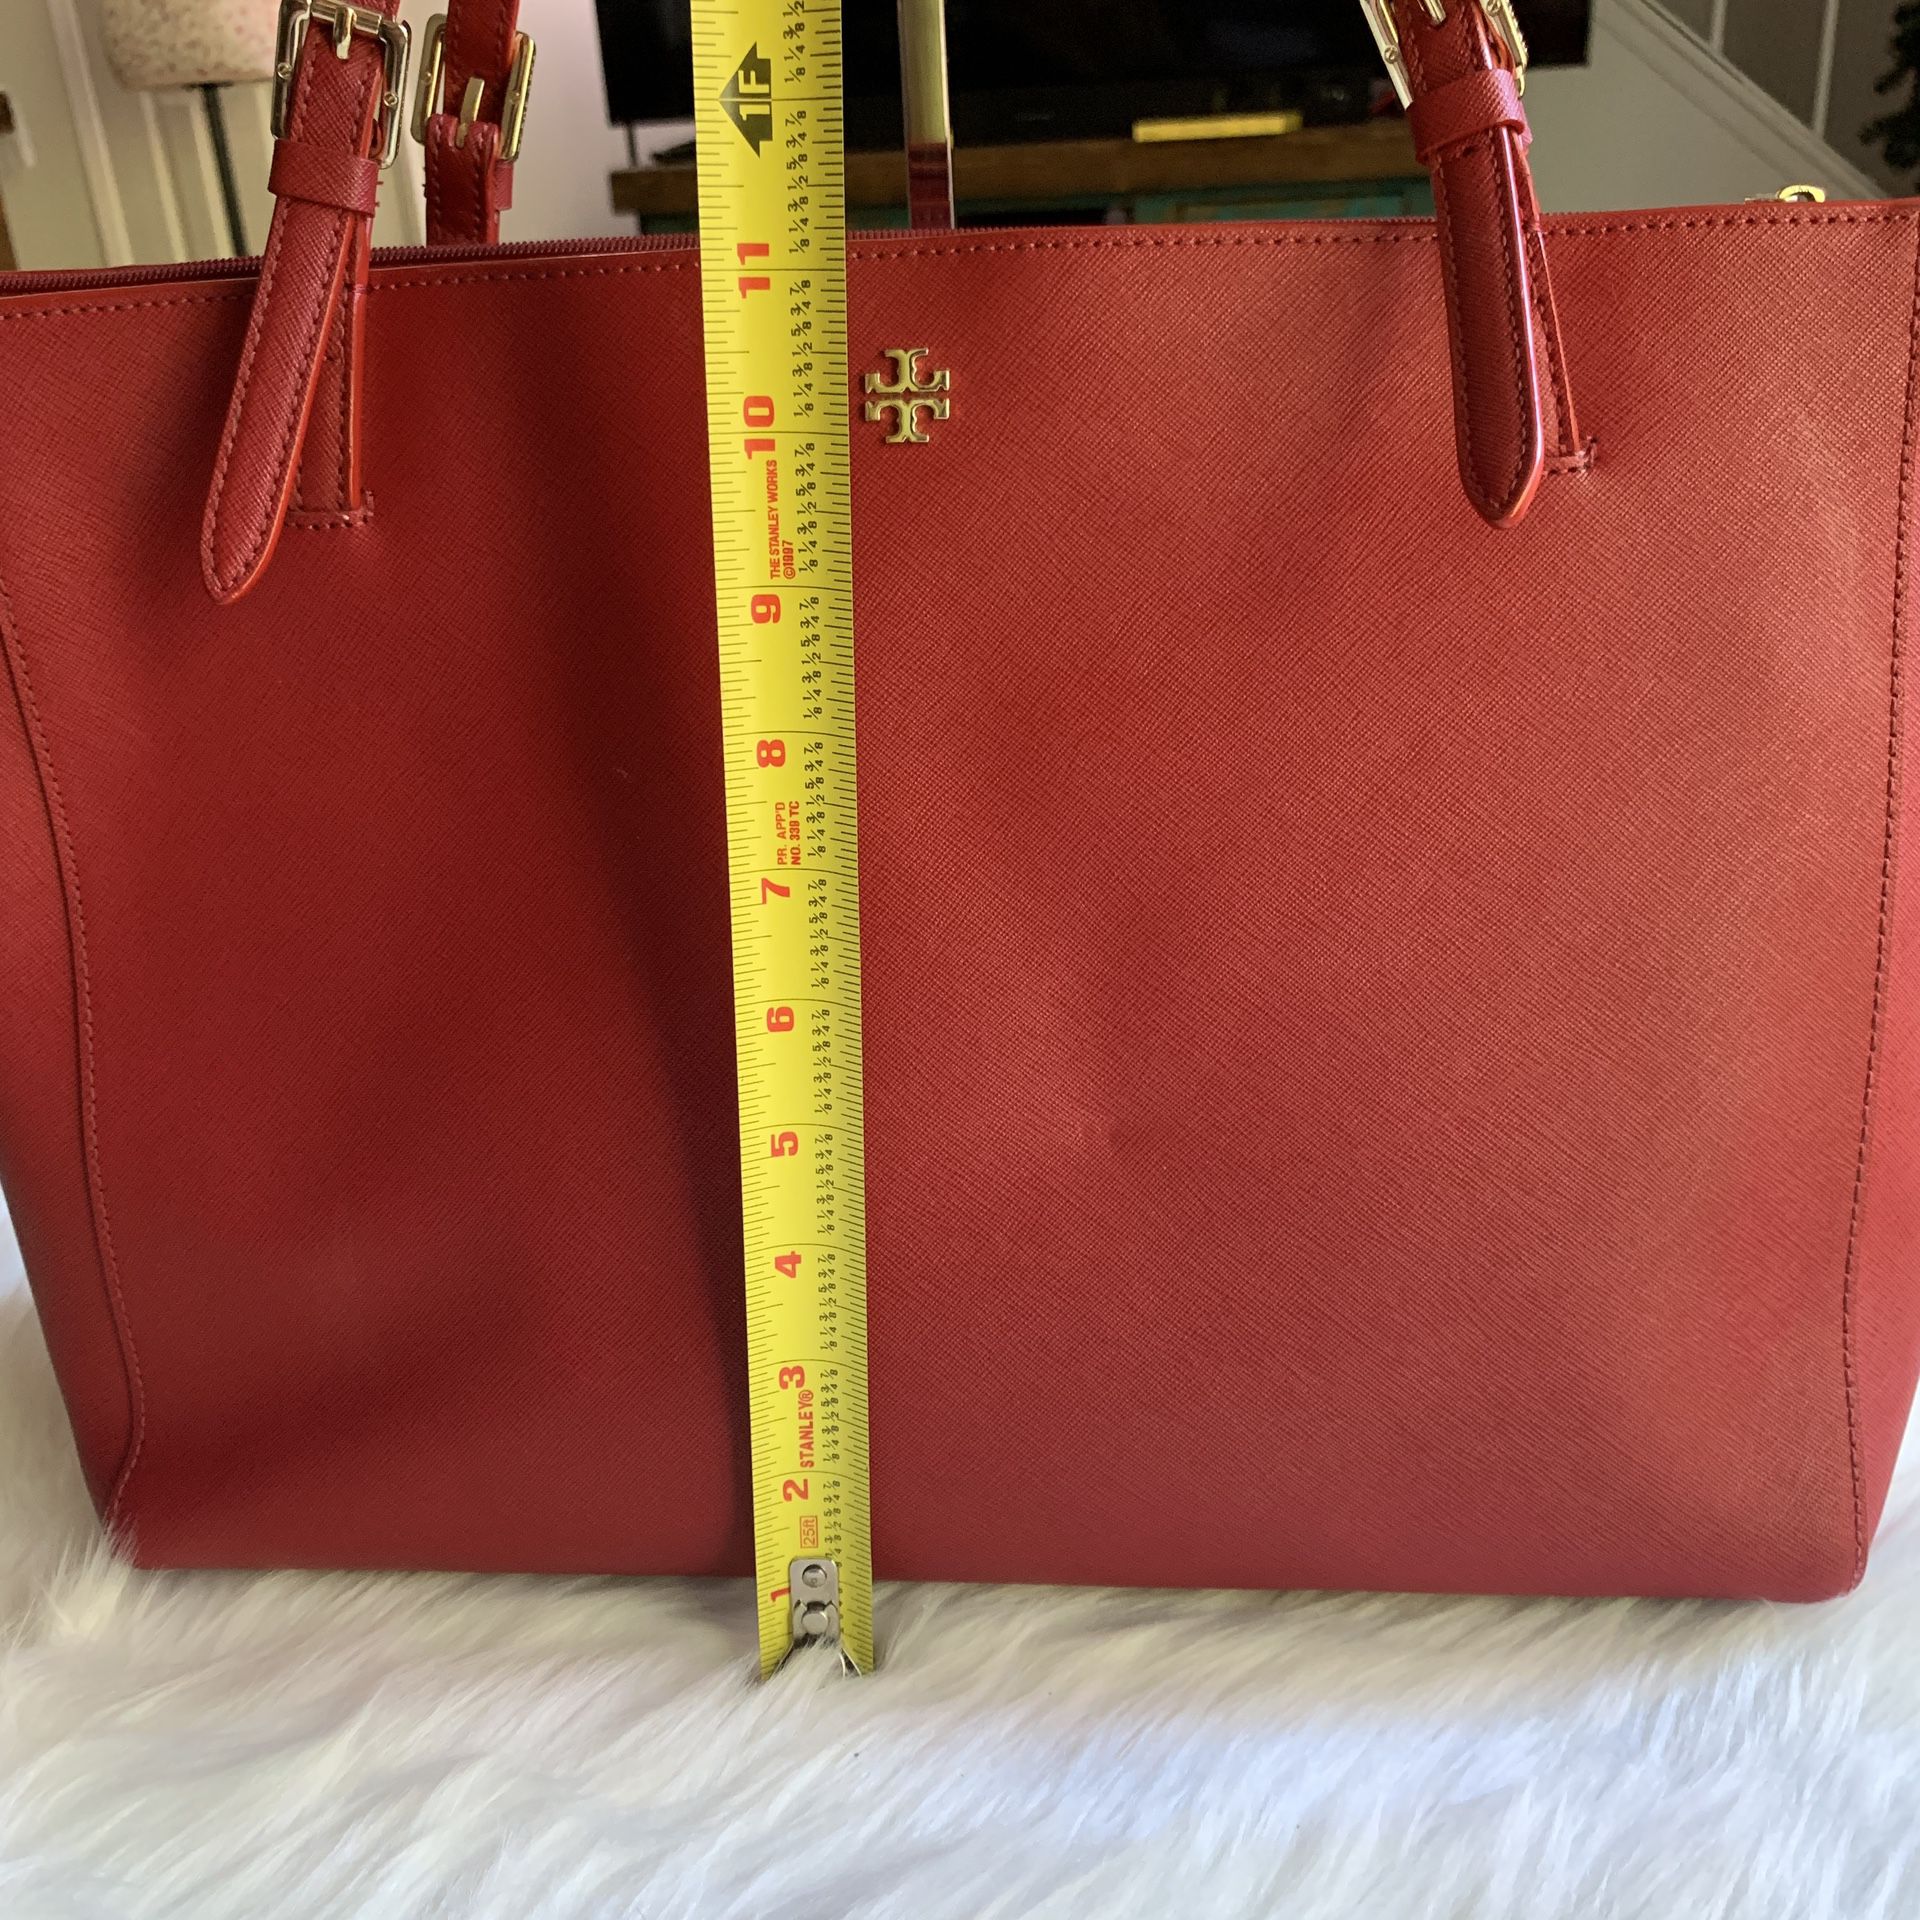 Tory Burch York Buckle Laptop Tote for Sale in Arcadia, CA - OfferUp